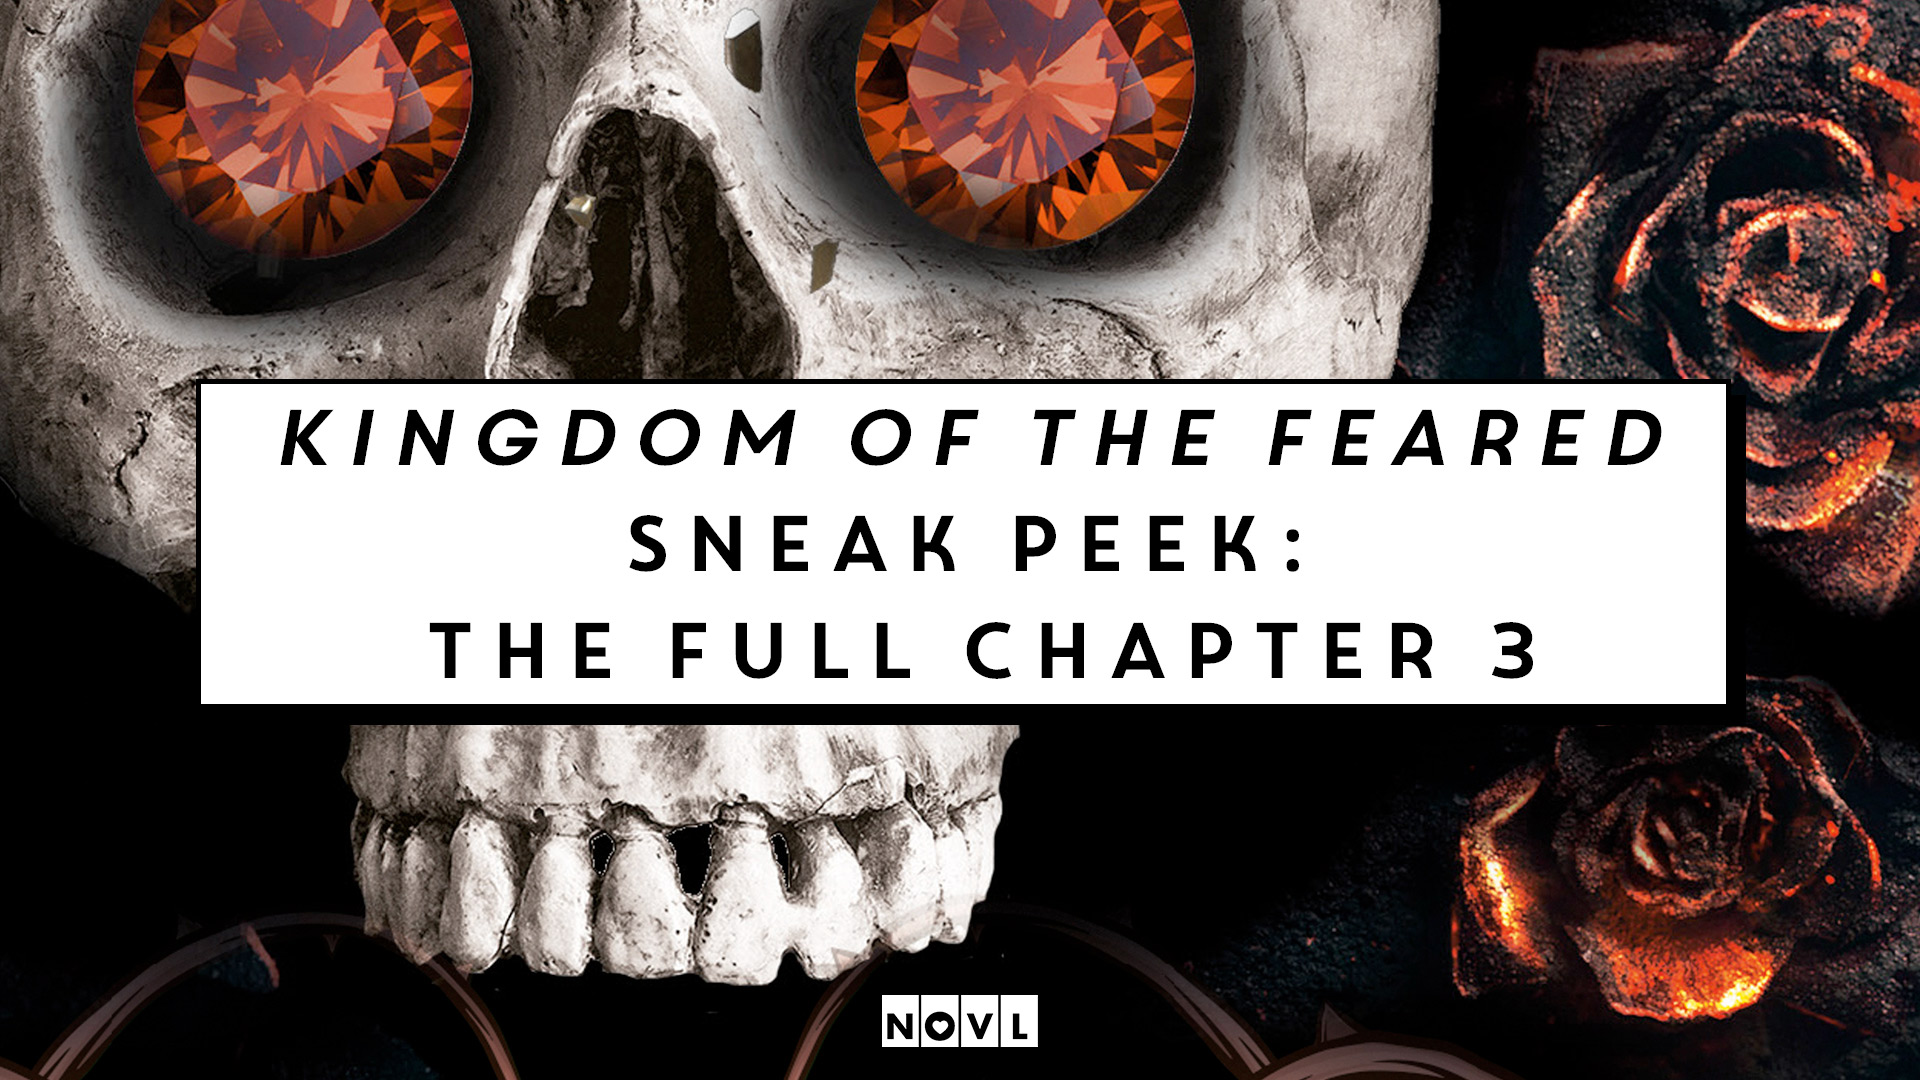 The NOVL Blog, Featured Image for Article: Kingdom of the Feared Sneak Peek: The Full Chapter 3